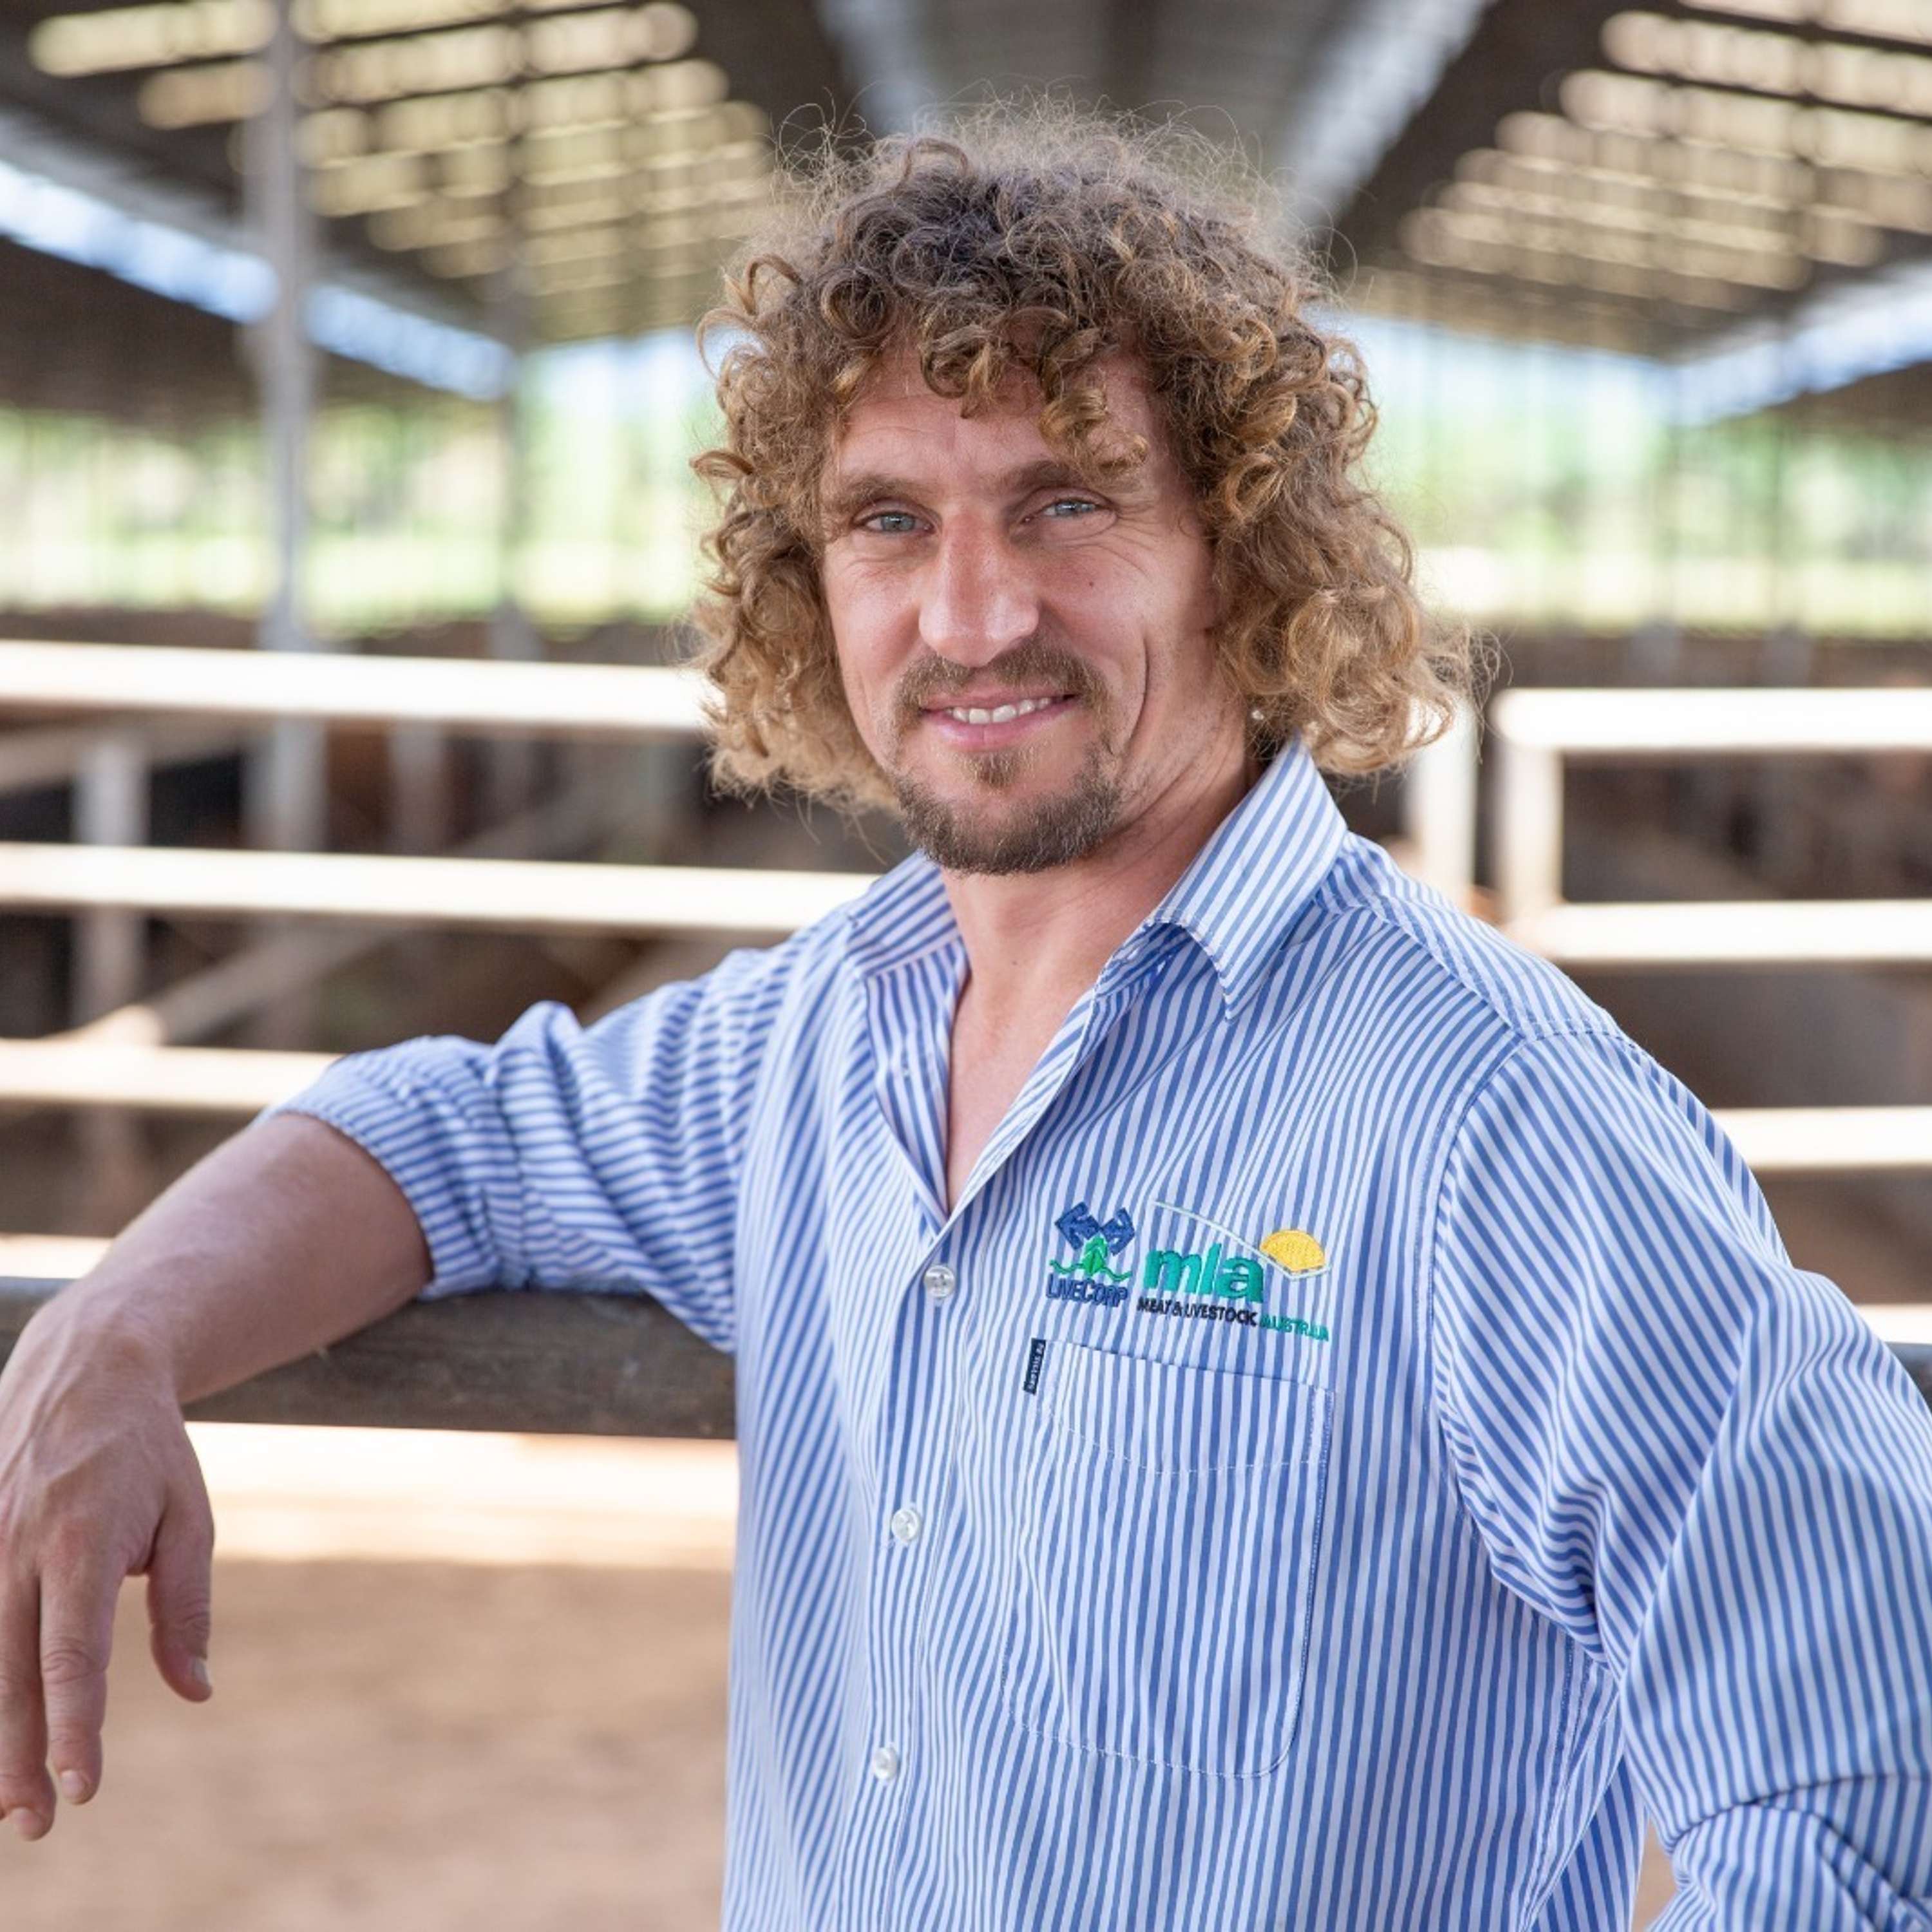 Change, Impact and an obligation for animal welfare with Michael Patching